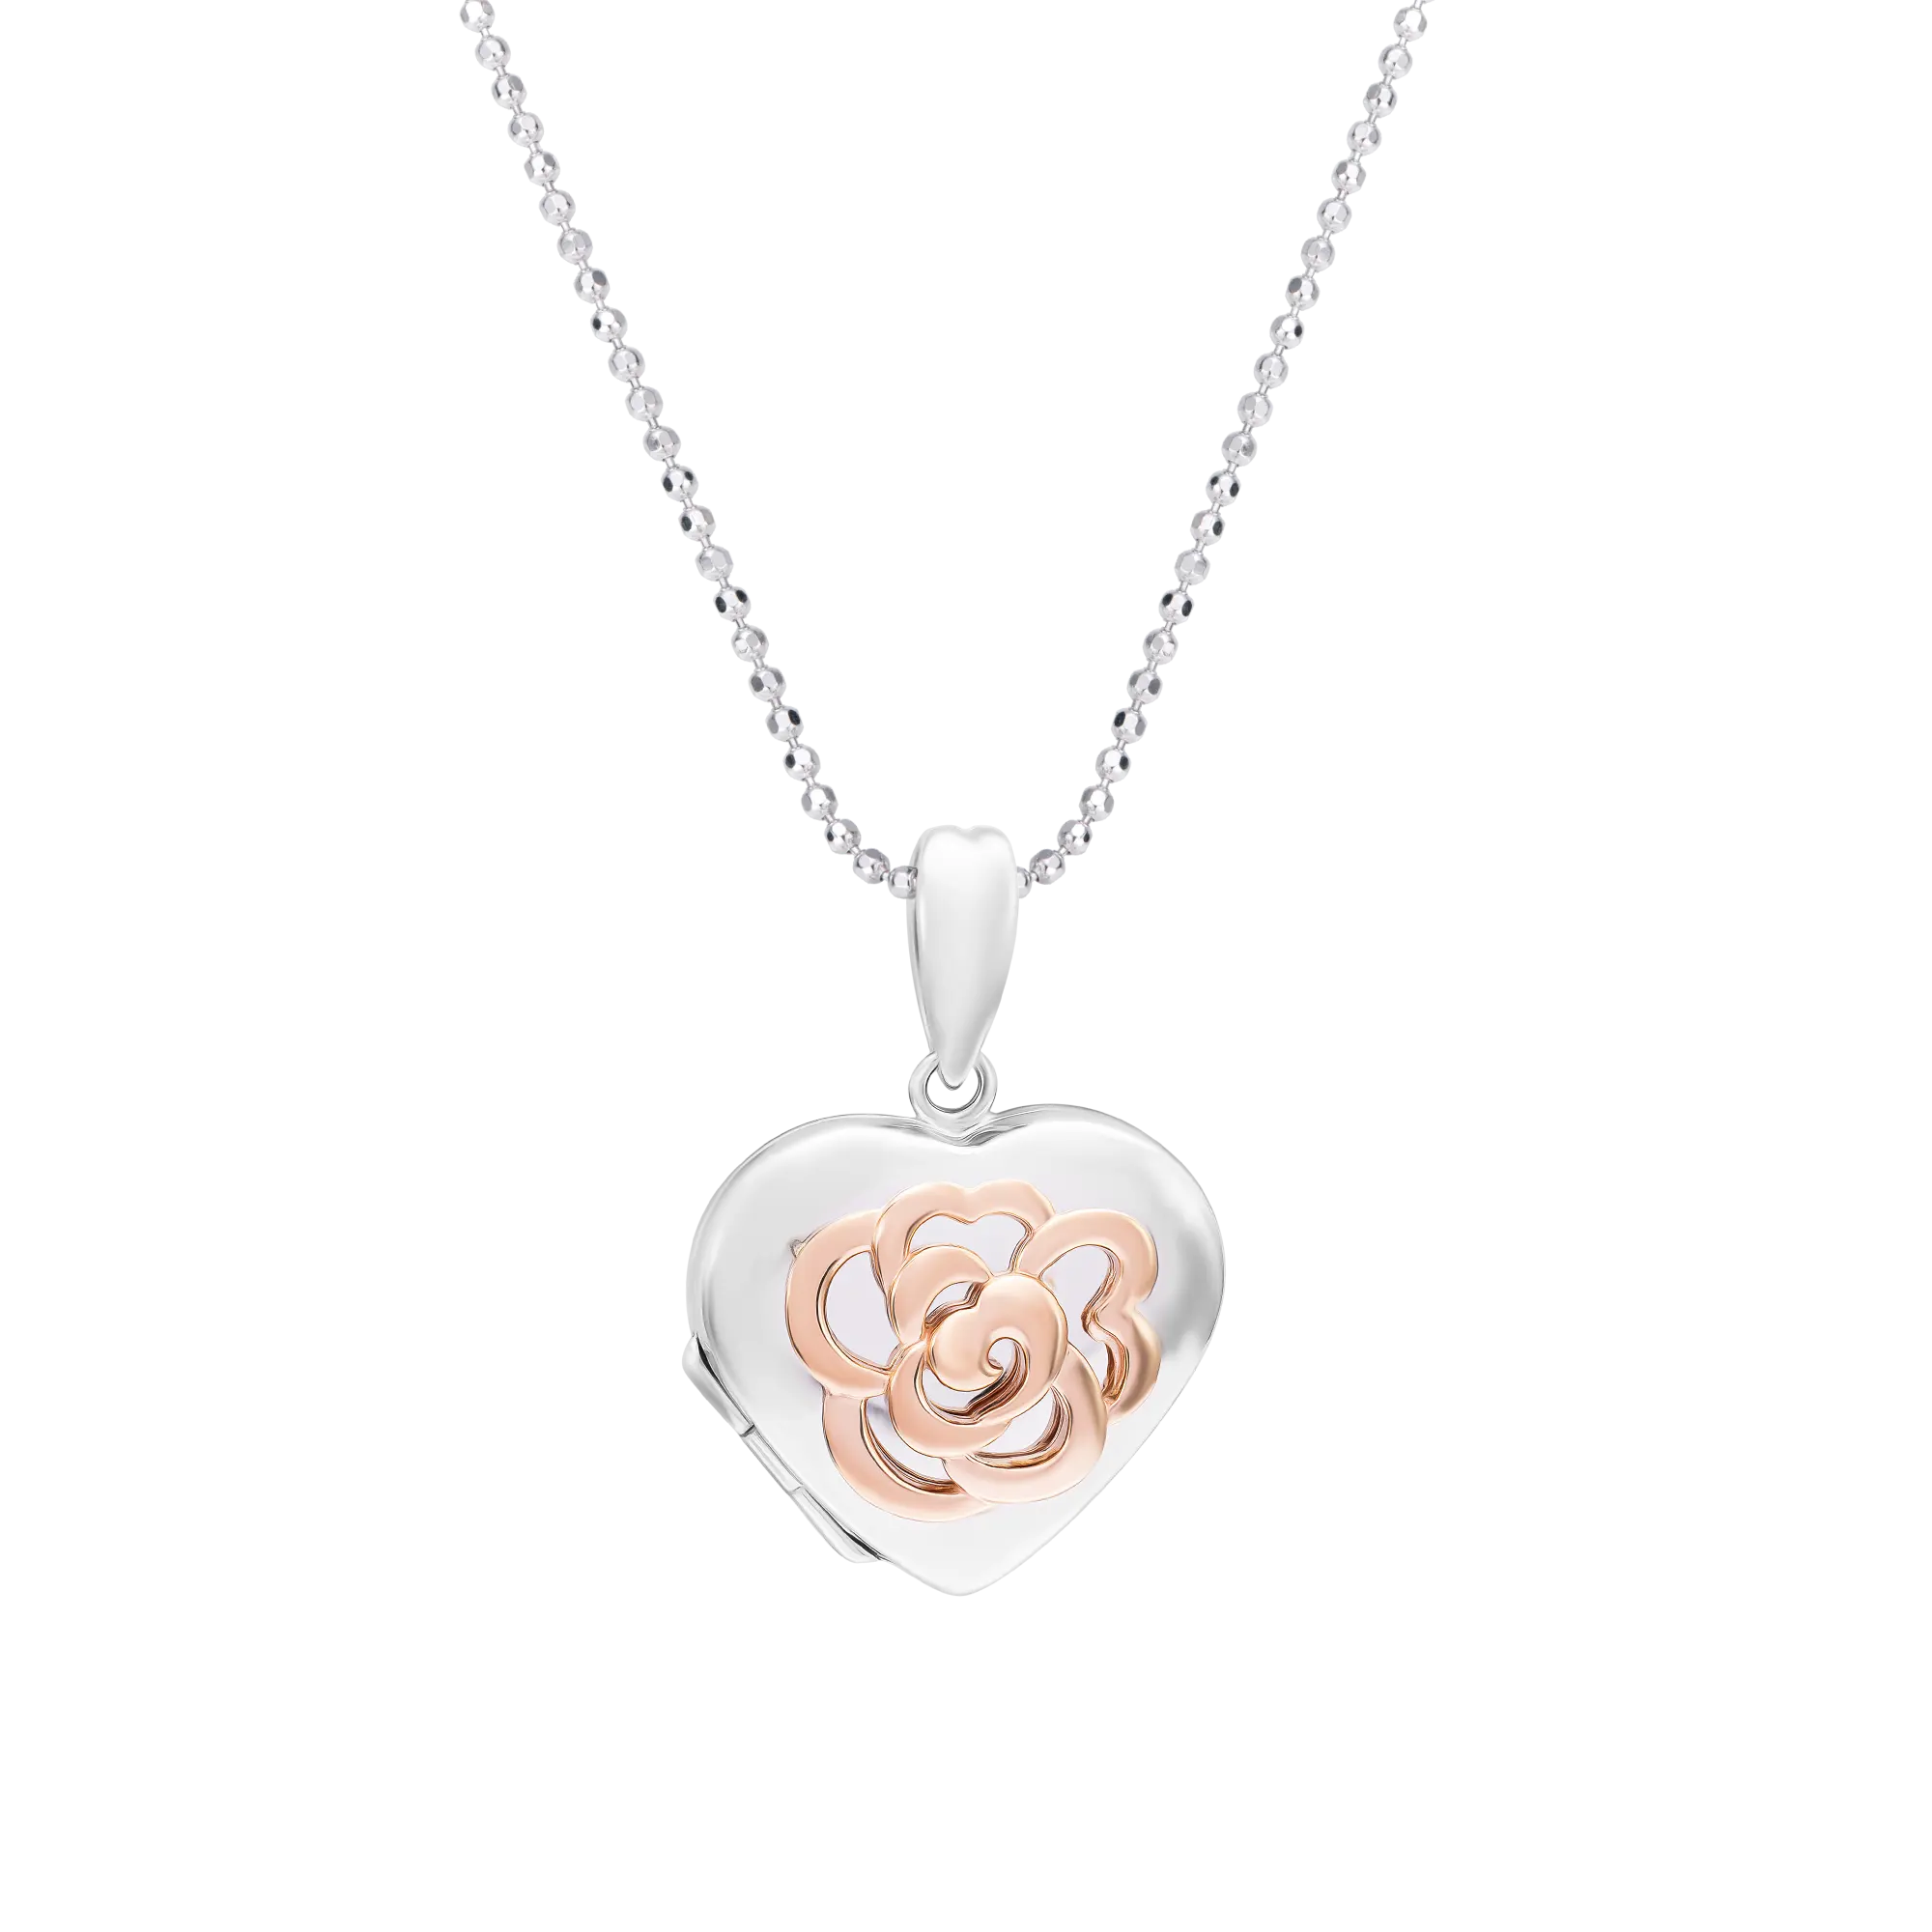 10k Real Solid Gold Jewelry Cz Pendant Necklace for Women accessories Heart Locket Necklace Fine Jewelry - PNJ Manufacturer